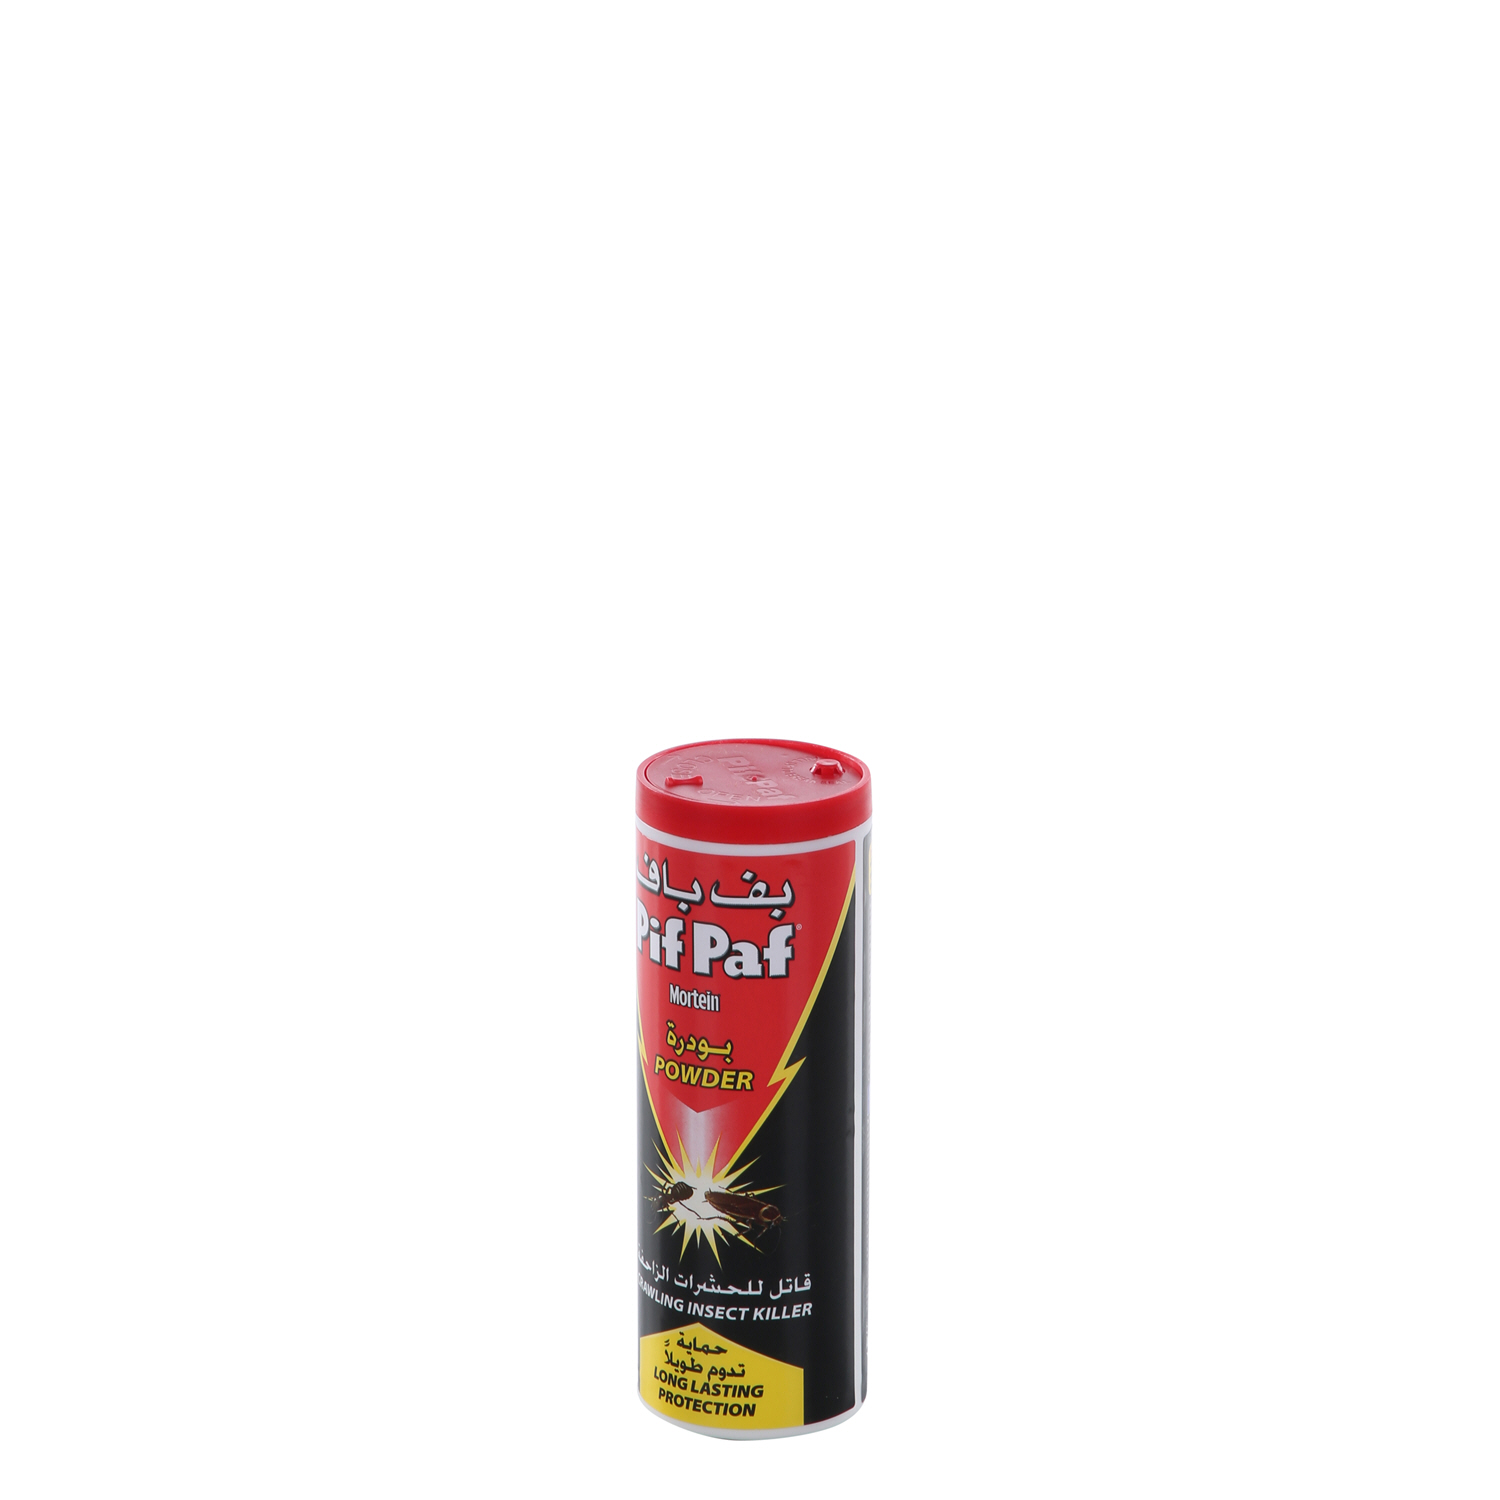 Pif Paf Insects Powder 100 g